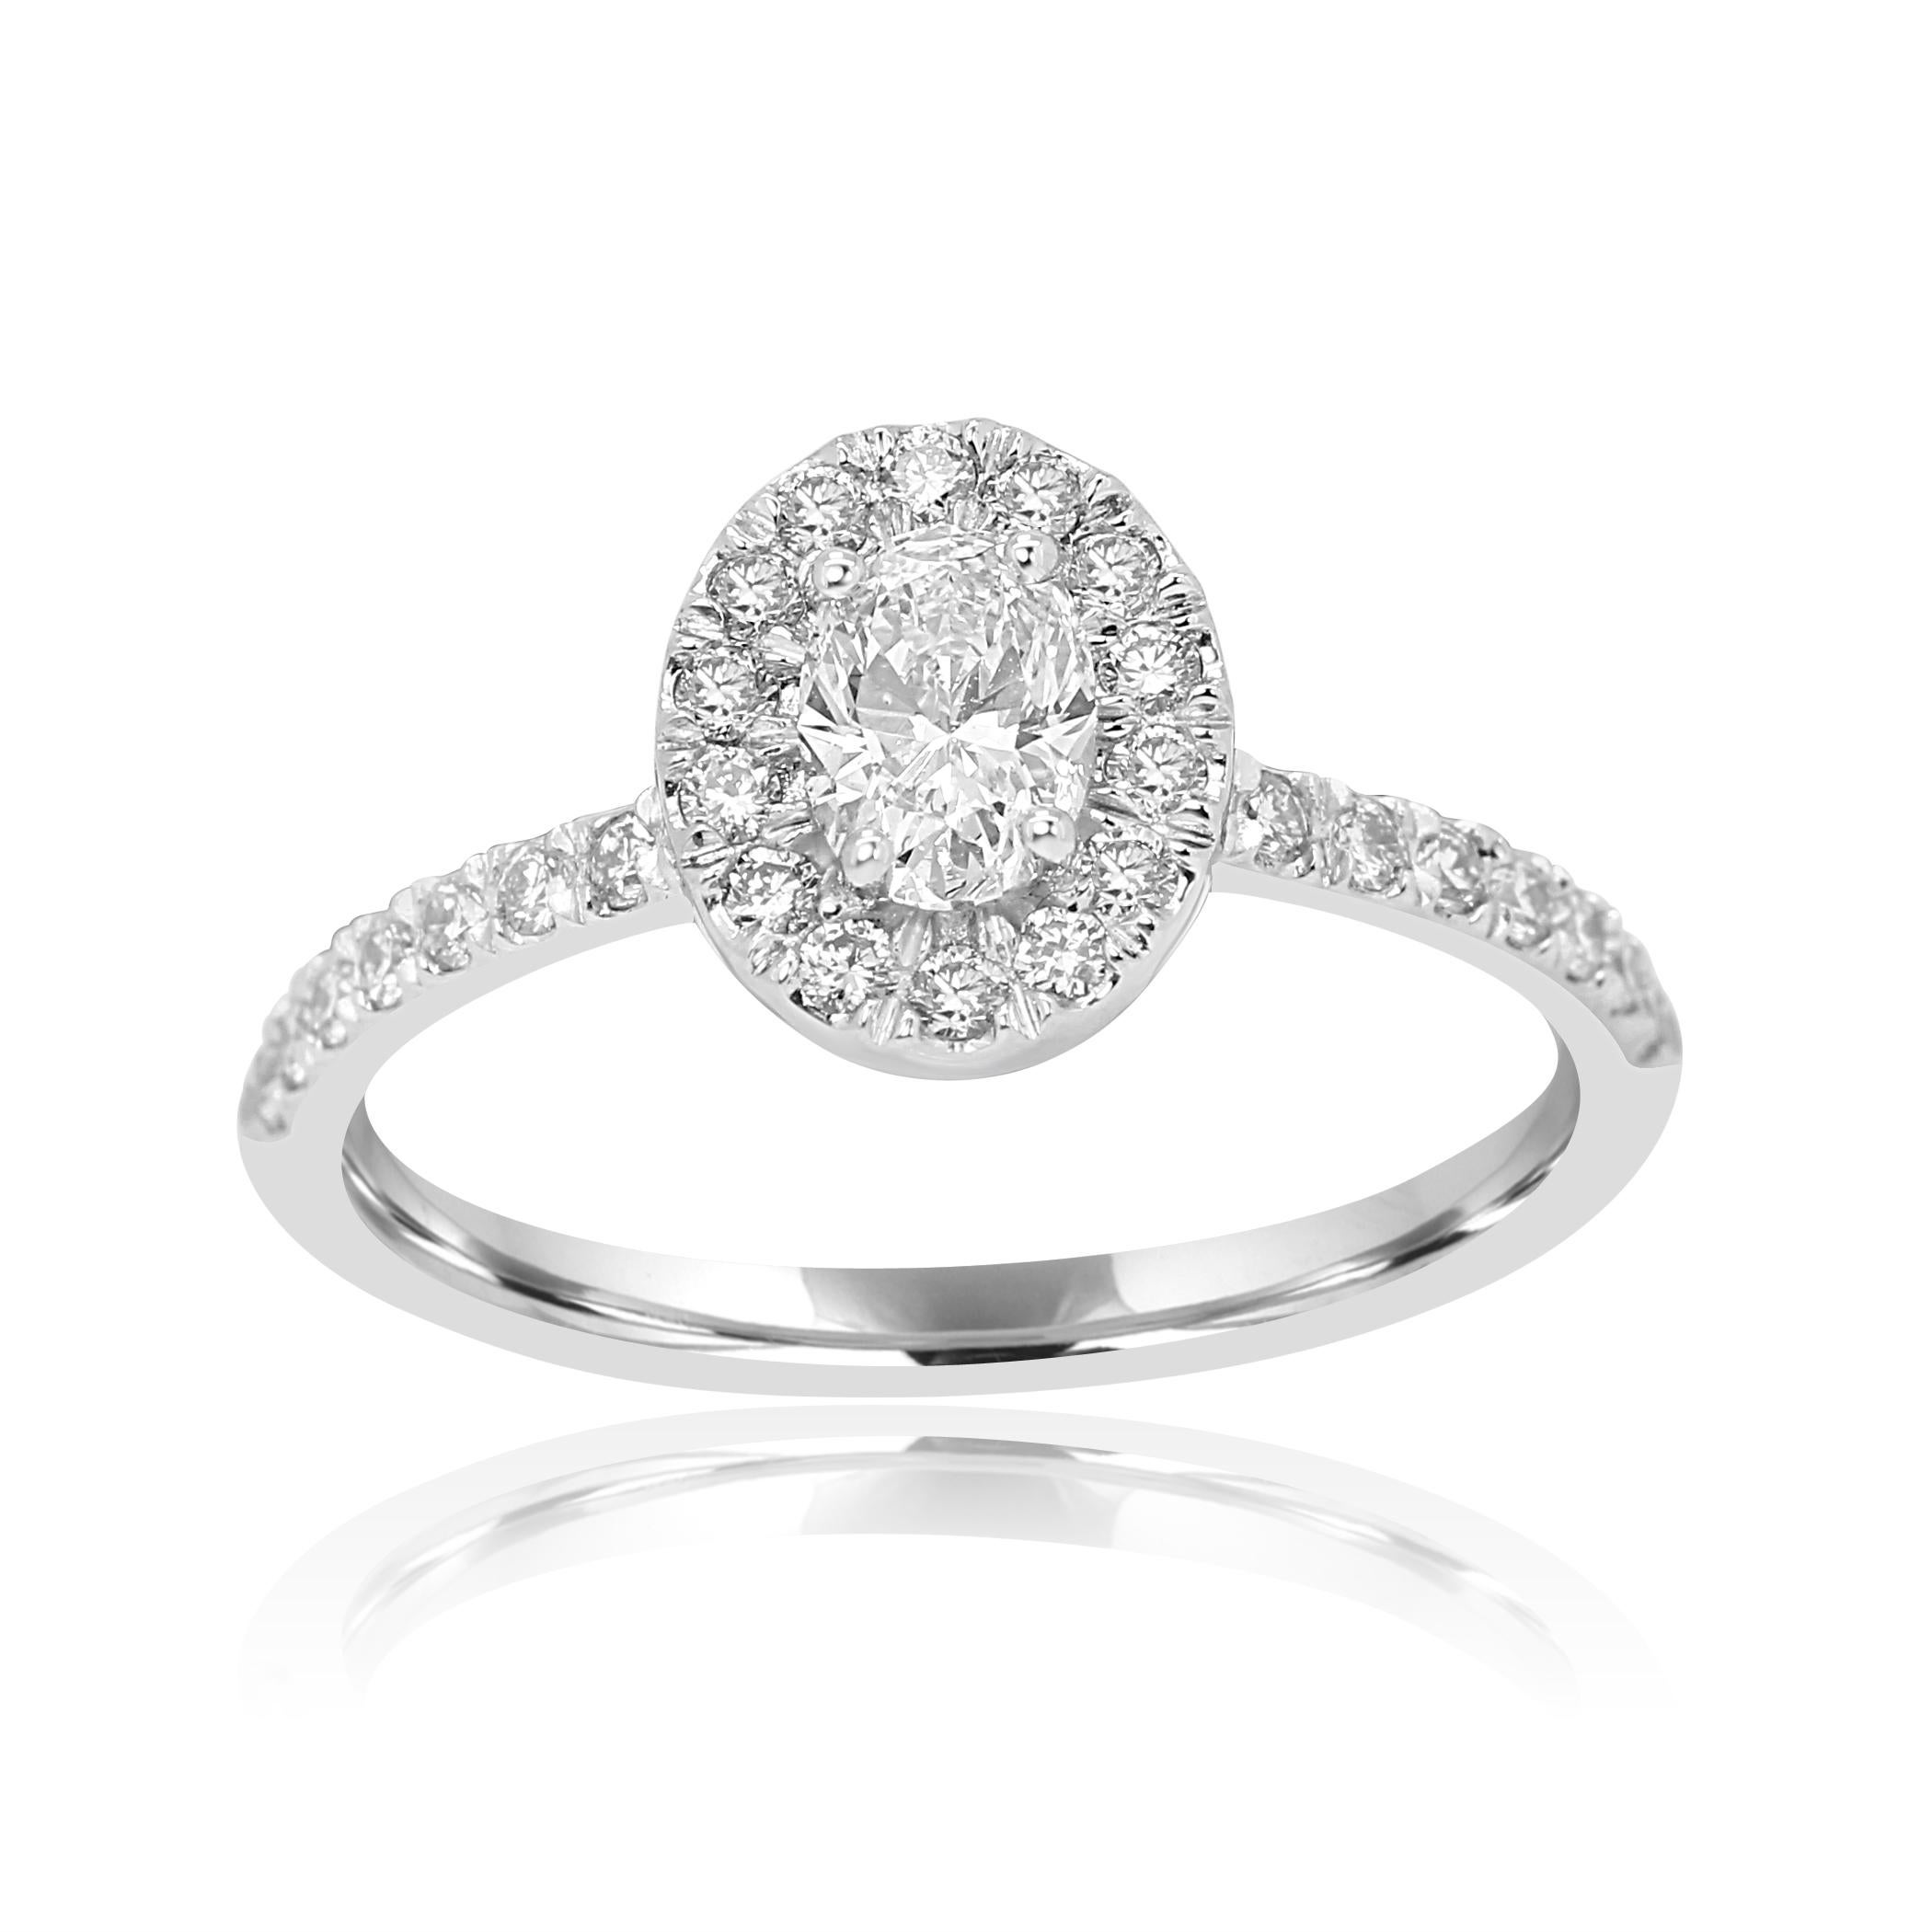 Stunning GIA Certified G Color SI1 Clarity Diamond Oval 0.46 Carat Encircled in a Single halo of White Round Diamonds 0.34 Carat set in 14K White Gold Classic always in style Bridal Engagement Ring.

Style available in different price ranges. Prices